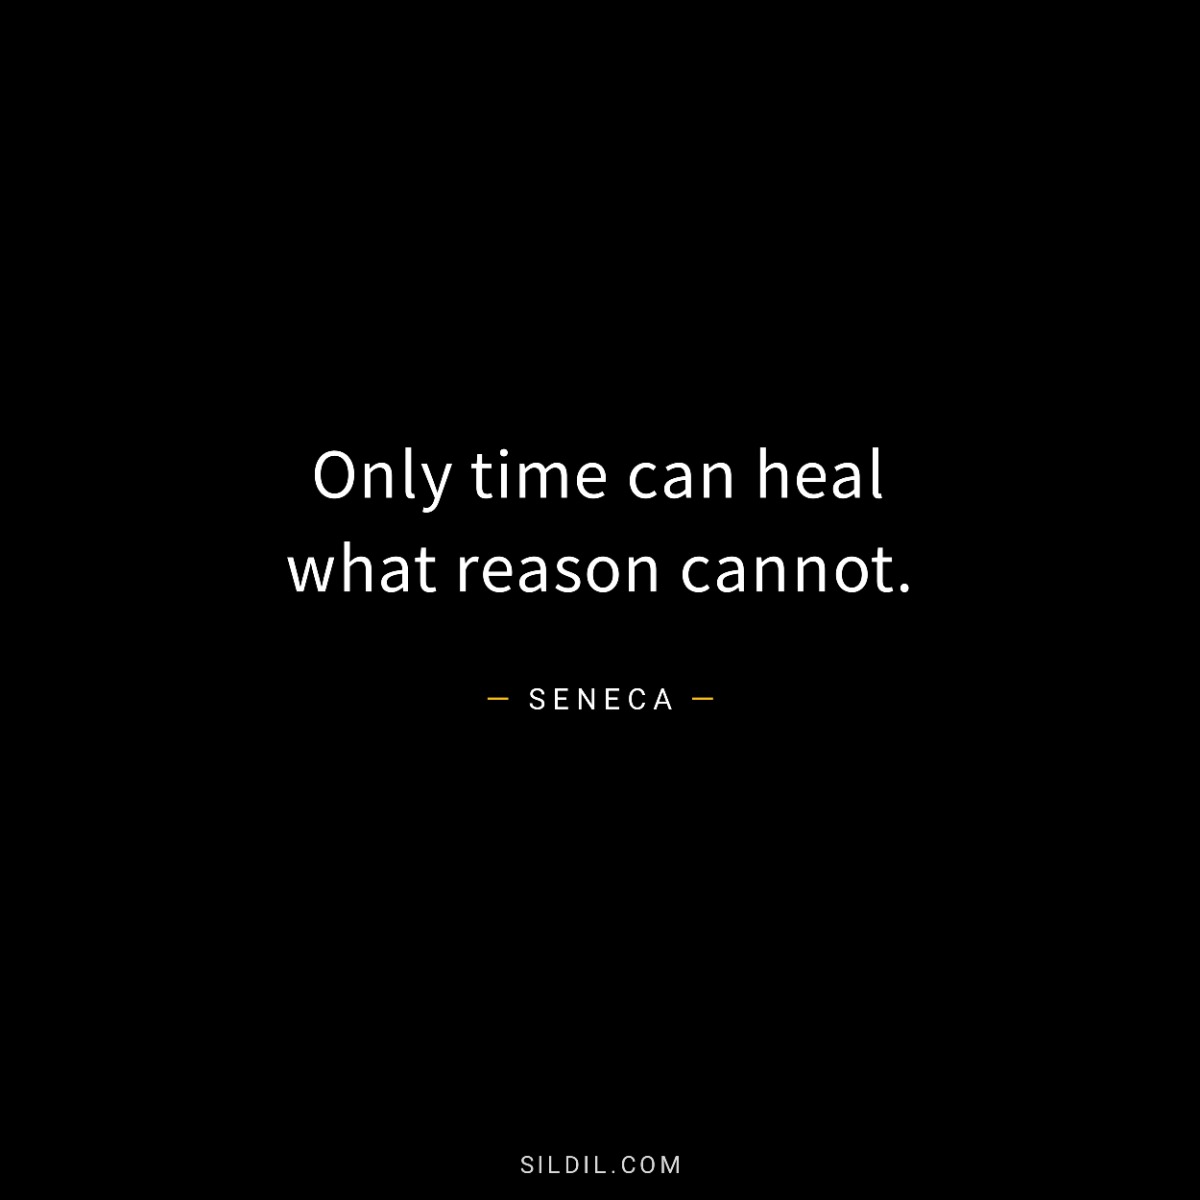 Only time can heal what reason cannot.